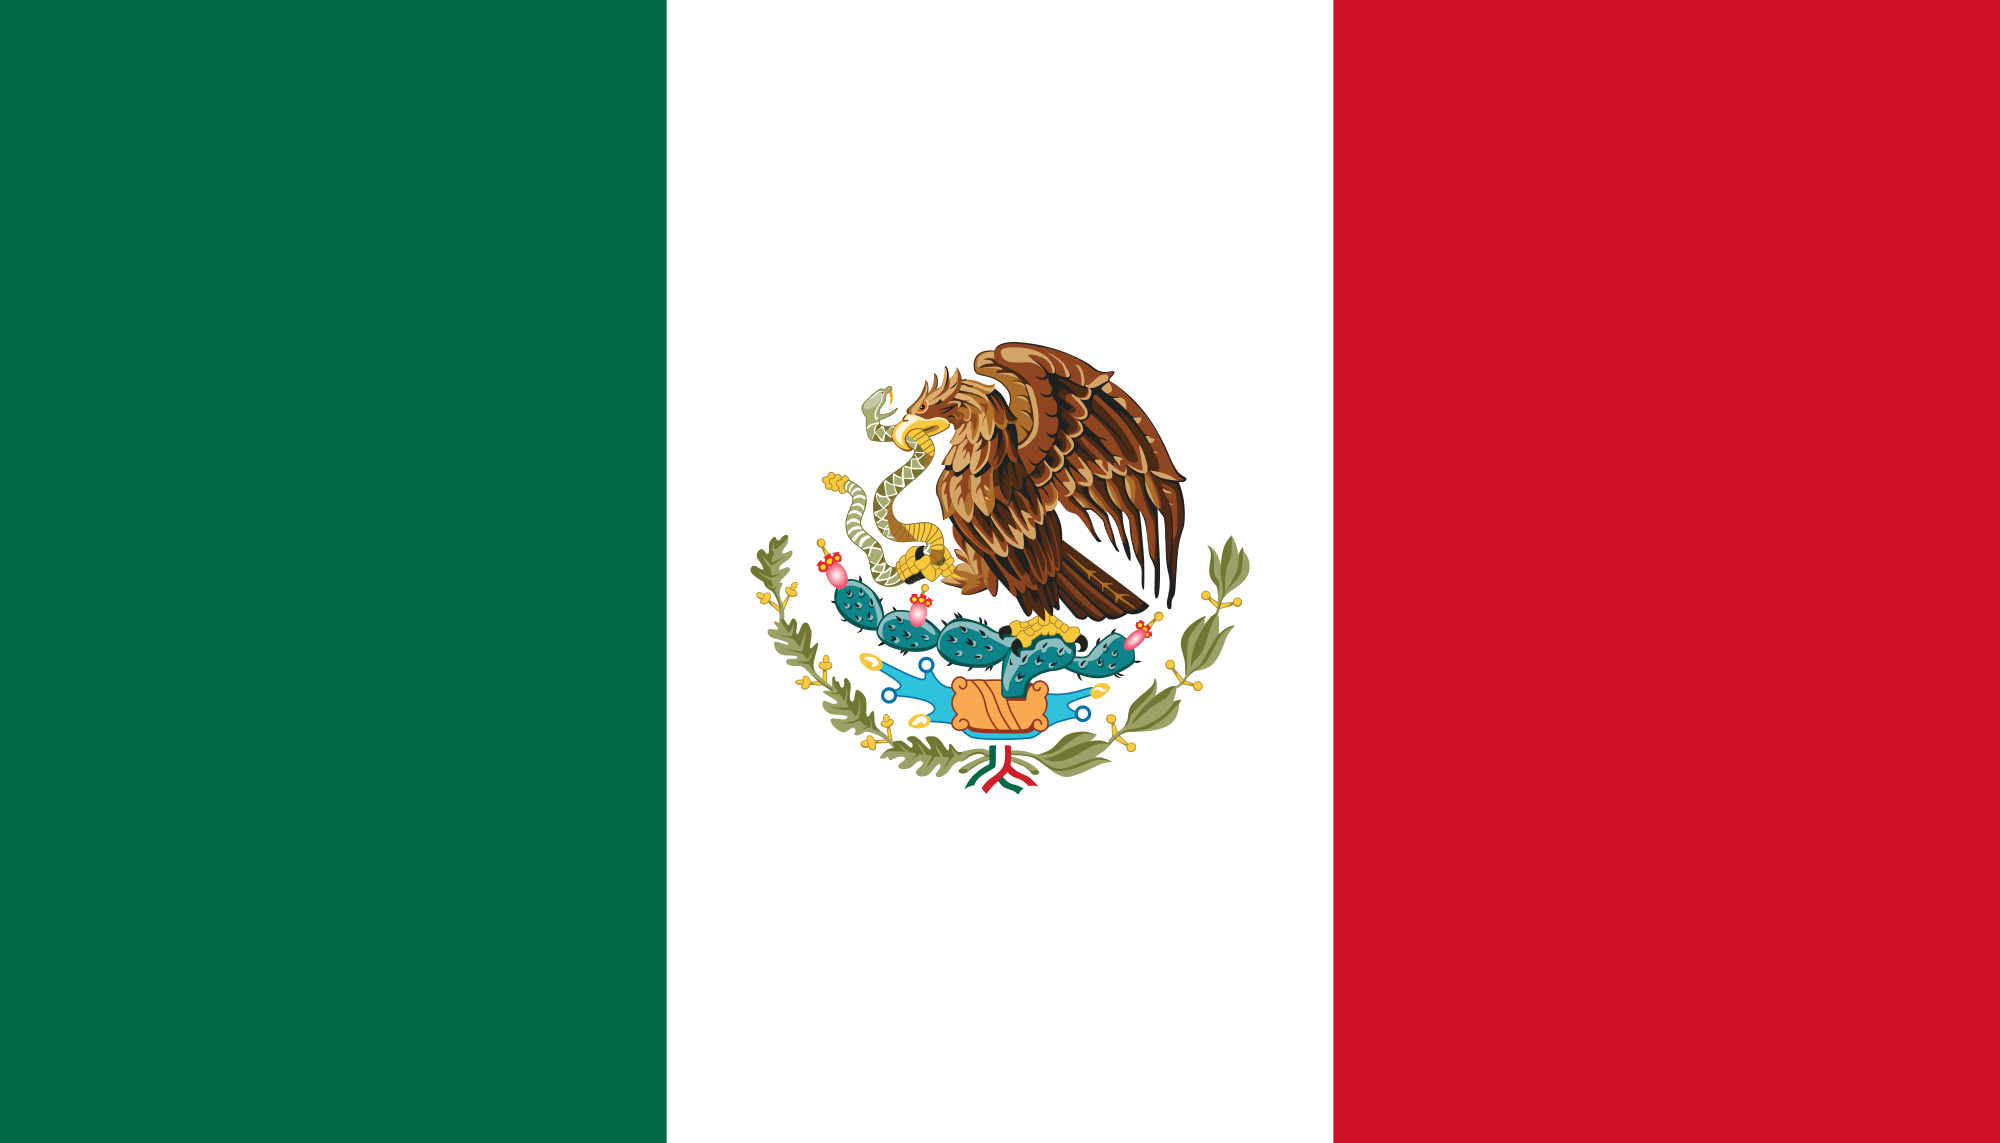 Mexico wants you to live a re